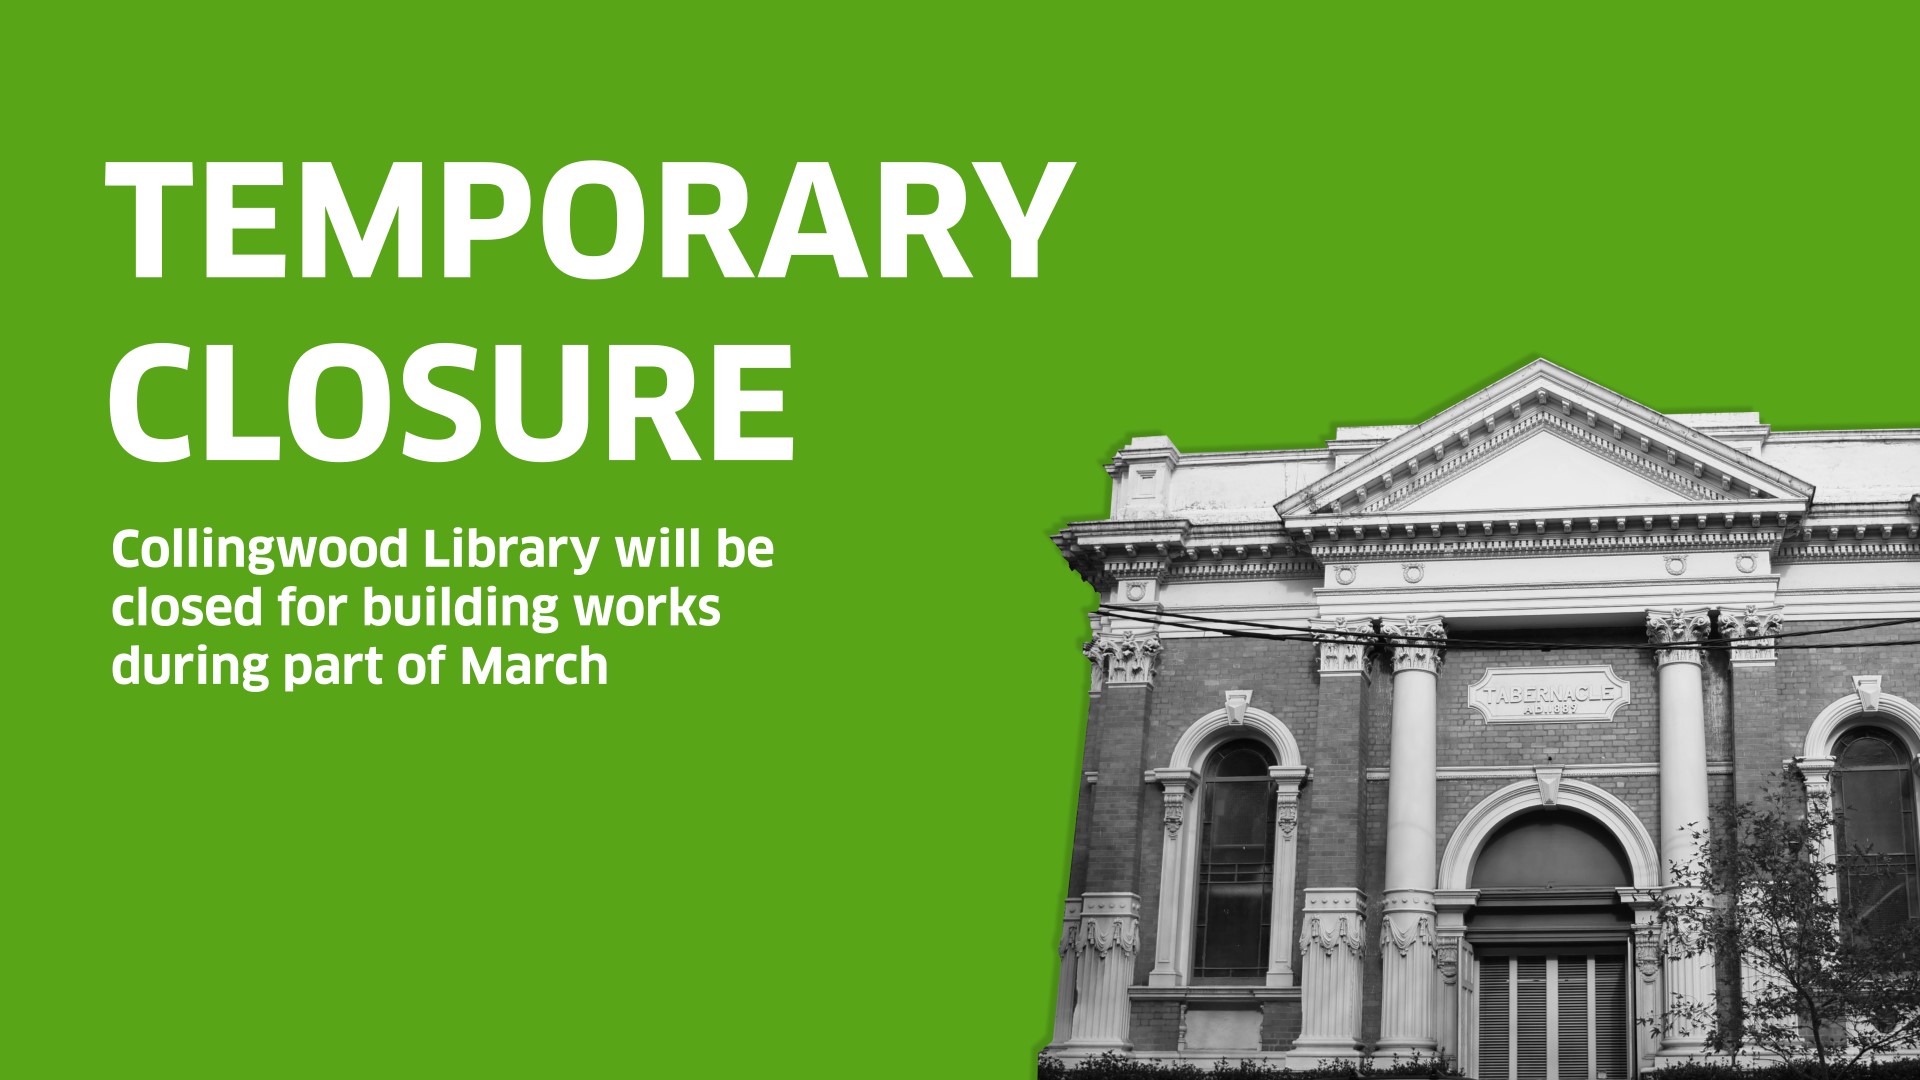 Image of Collingwood Library on a green background. Text mentions that Collingwood Library will be temporarily closed for building works in early March 2023.